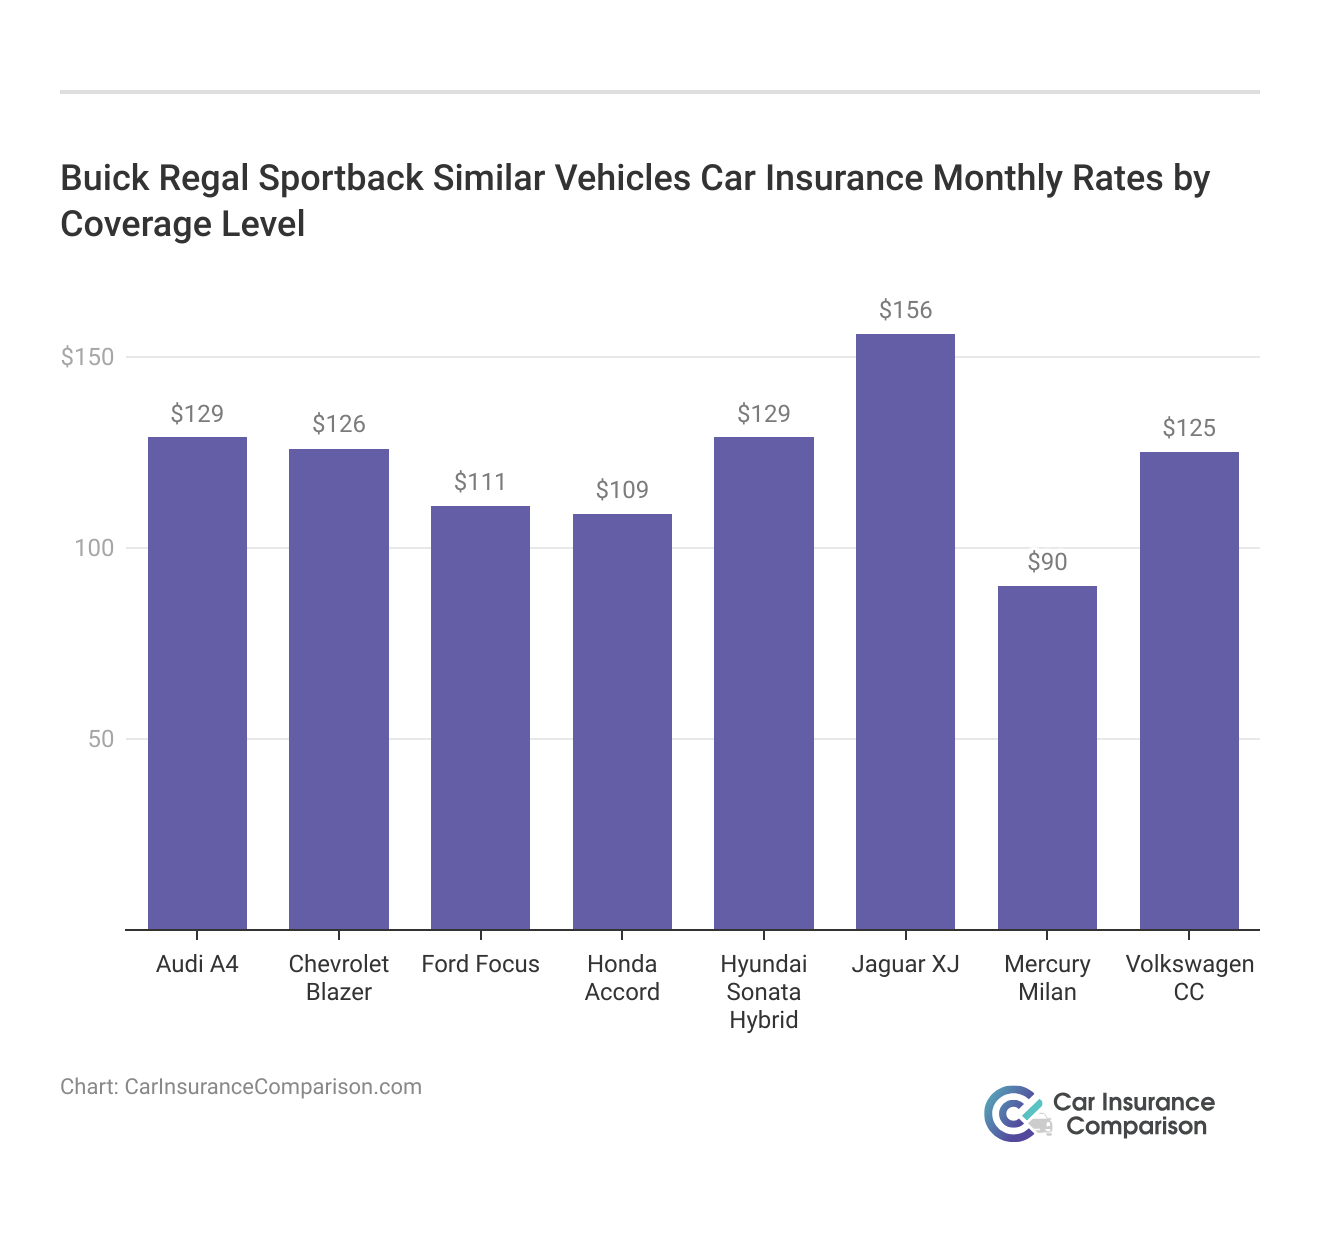 <h3>Buick Regal Sportback Similar Vehicles Car Insurance Monthly Rates by Coverage Level</h3>